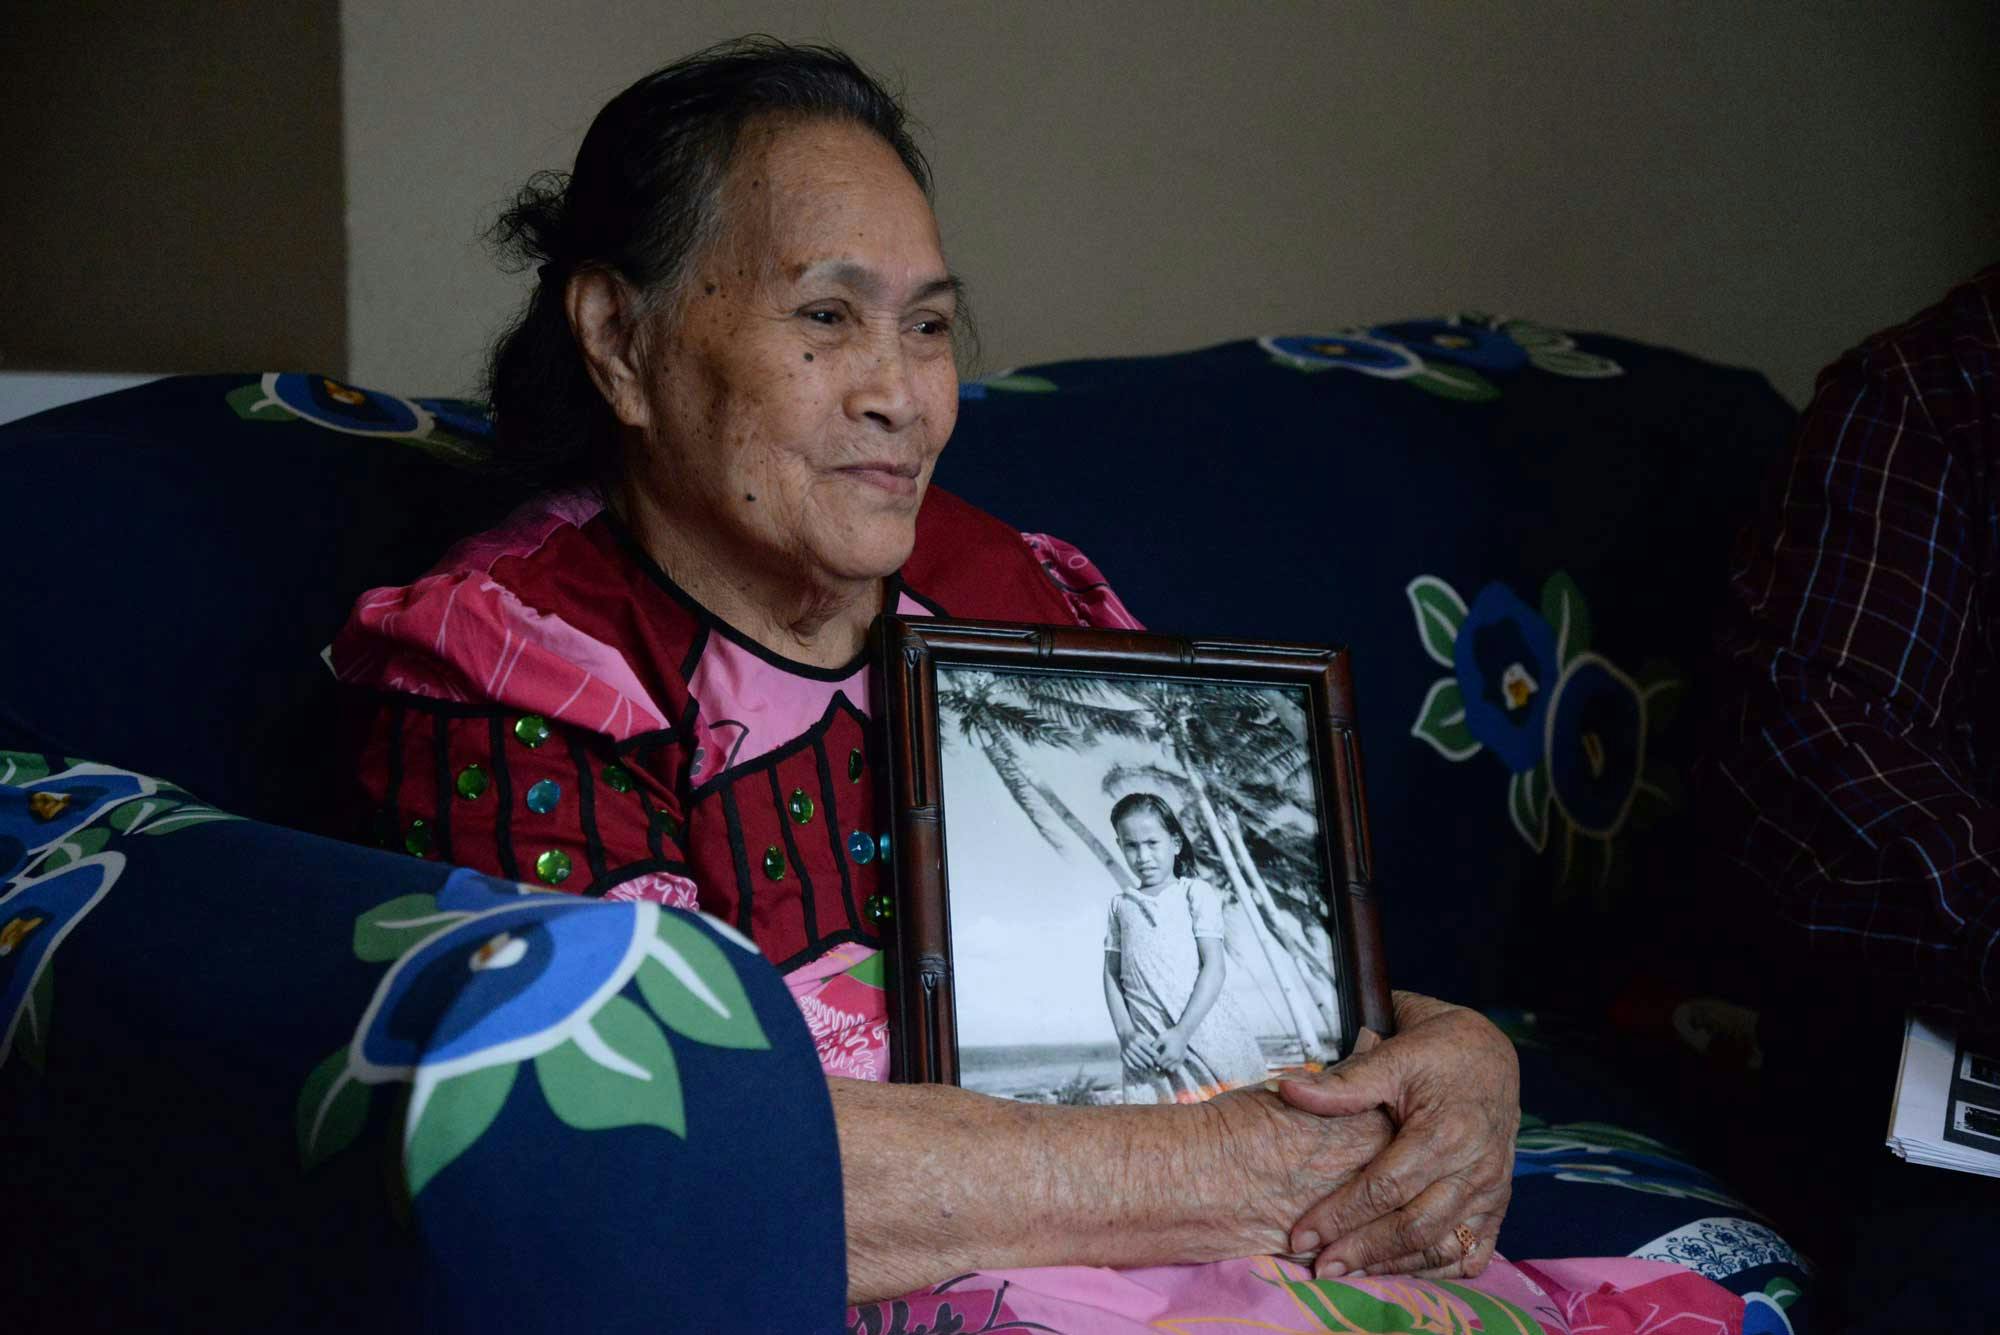 Sitting on a couch, Mojina Mote holds a framed photo of herself as a young girl.